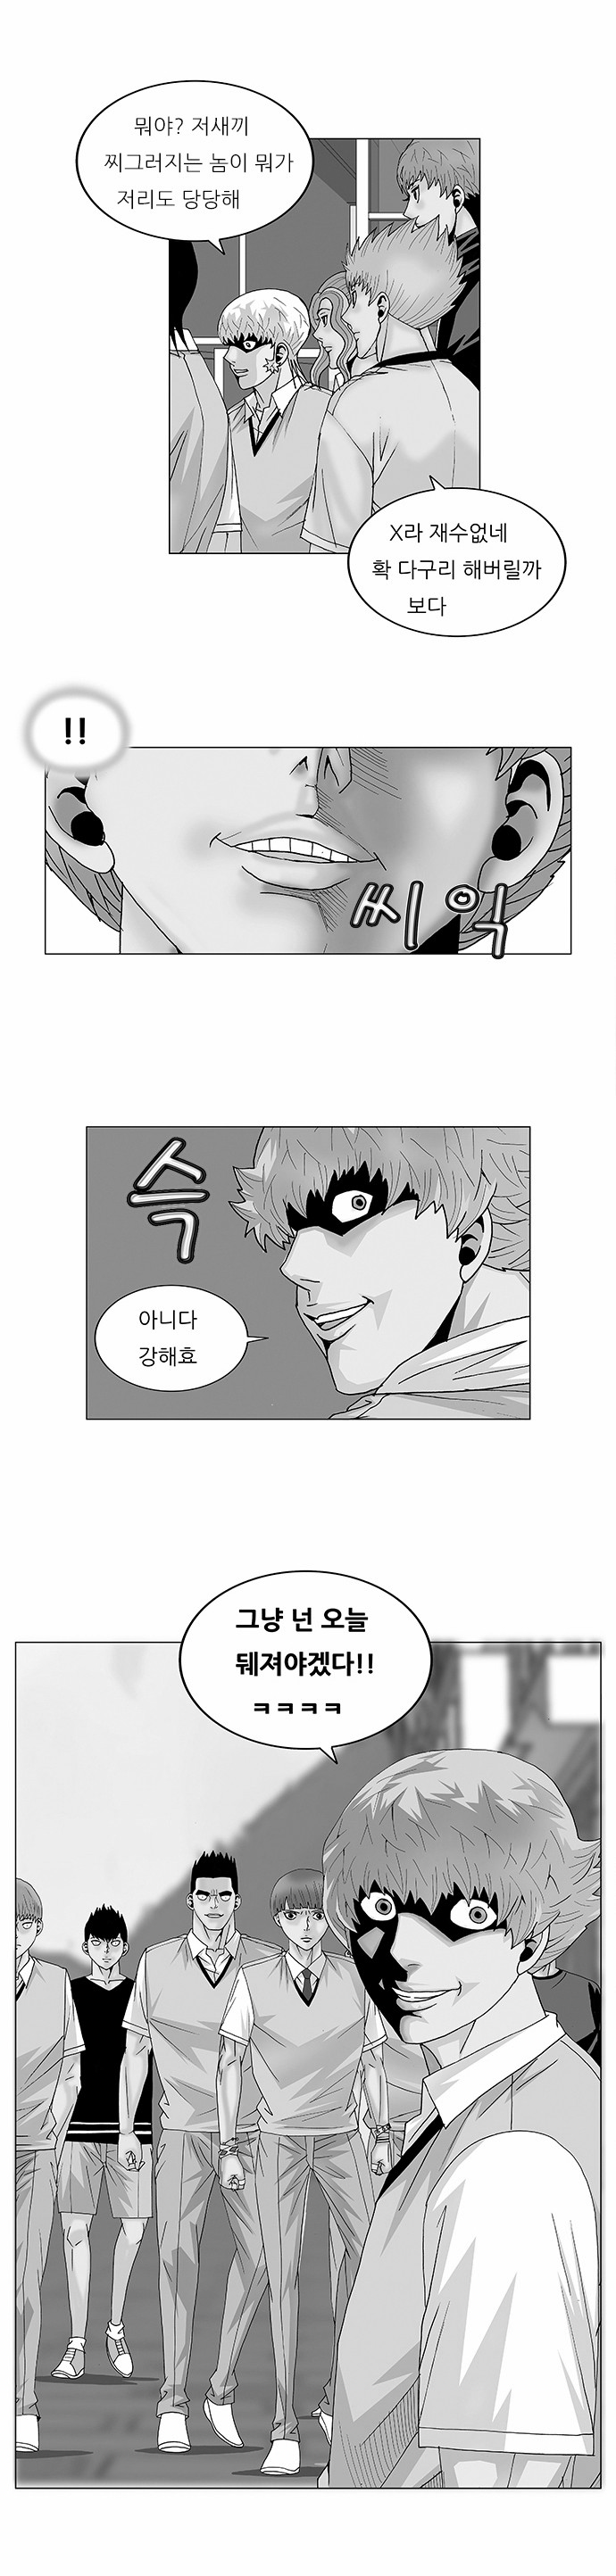 Ultimate Legend - Kang Hae Hyo - Chapter 94 - Page 1